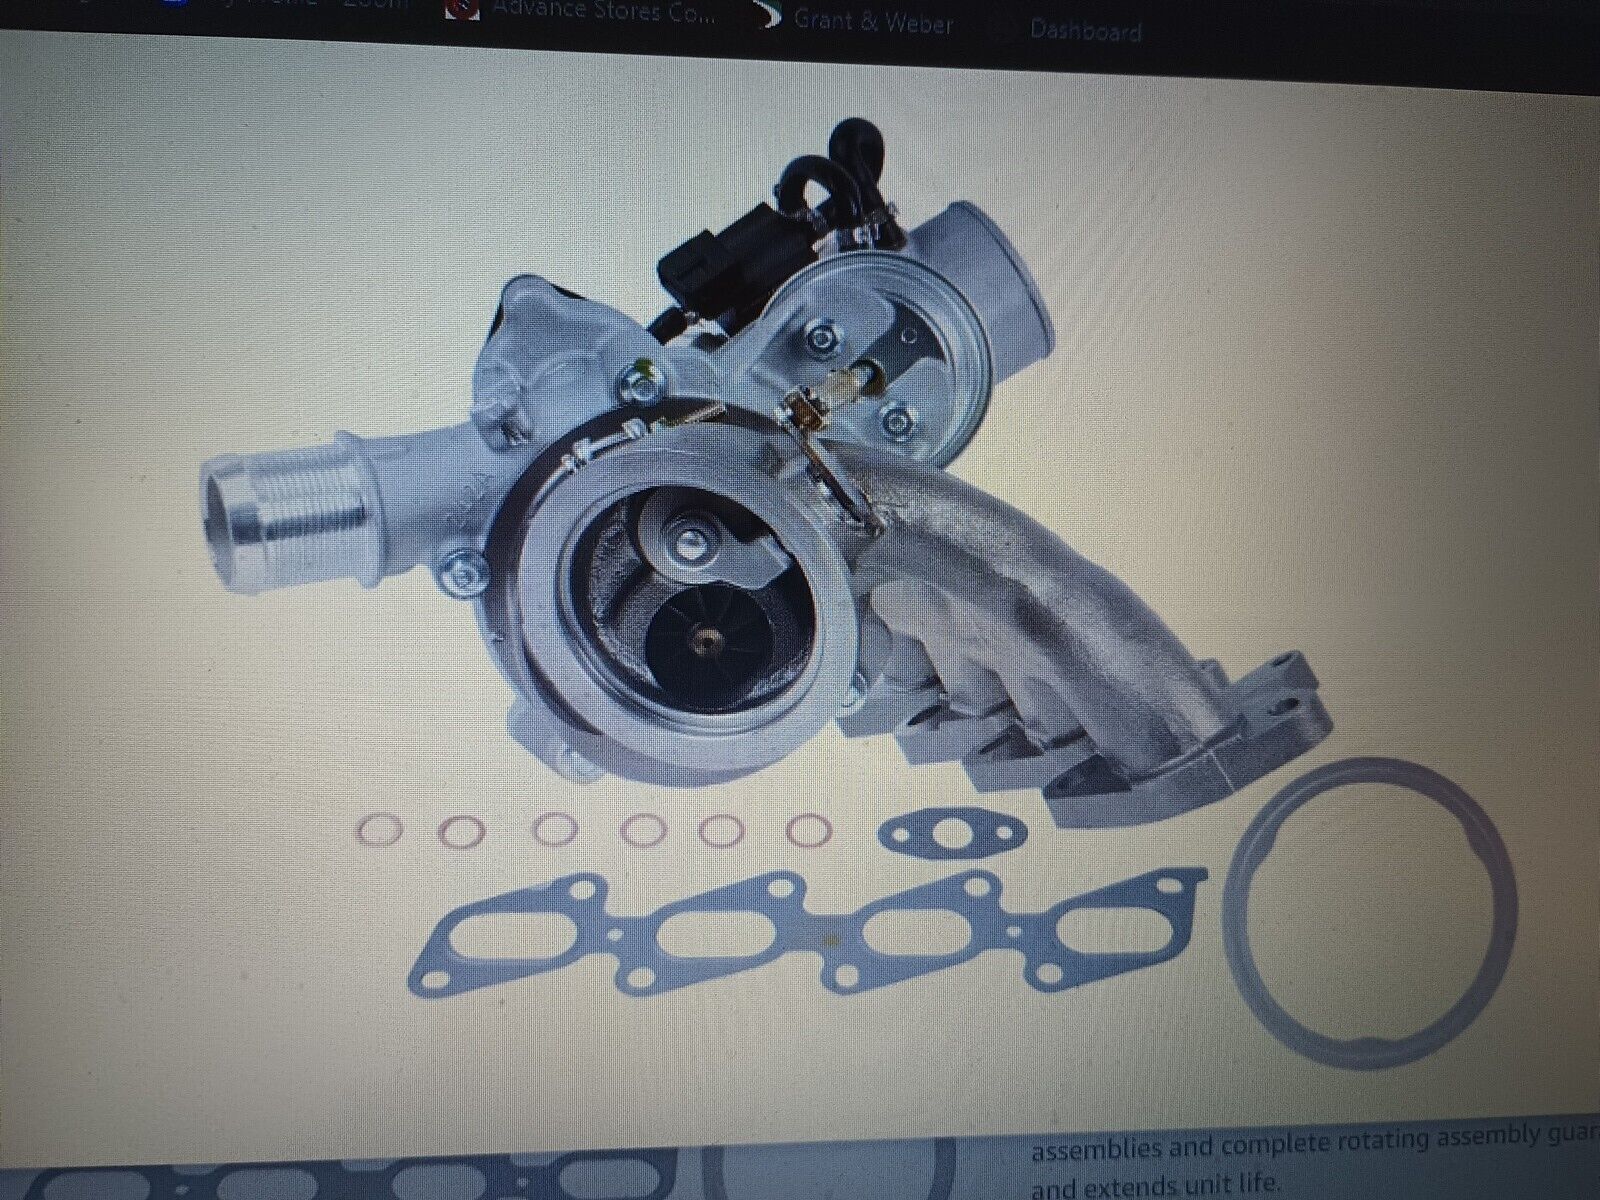 Turbocharger-VIN: B, GAS, Eng Code: LUV, Turbo Rotomaster A1140104N- New unused